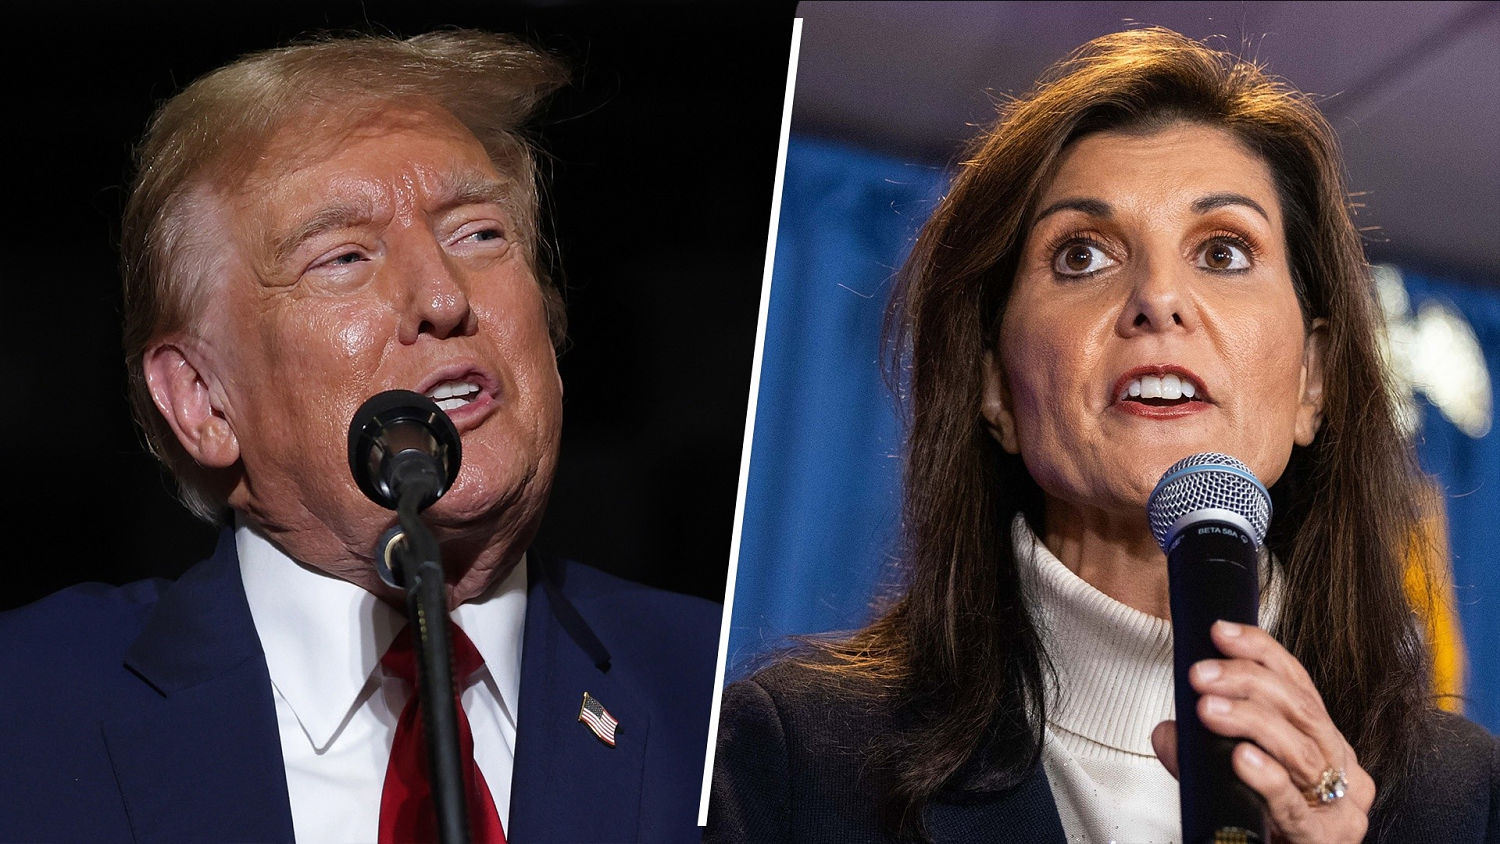 Nikki Haley says she will vote for Trump in 2024 election